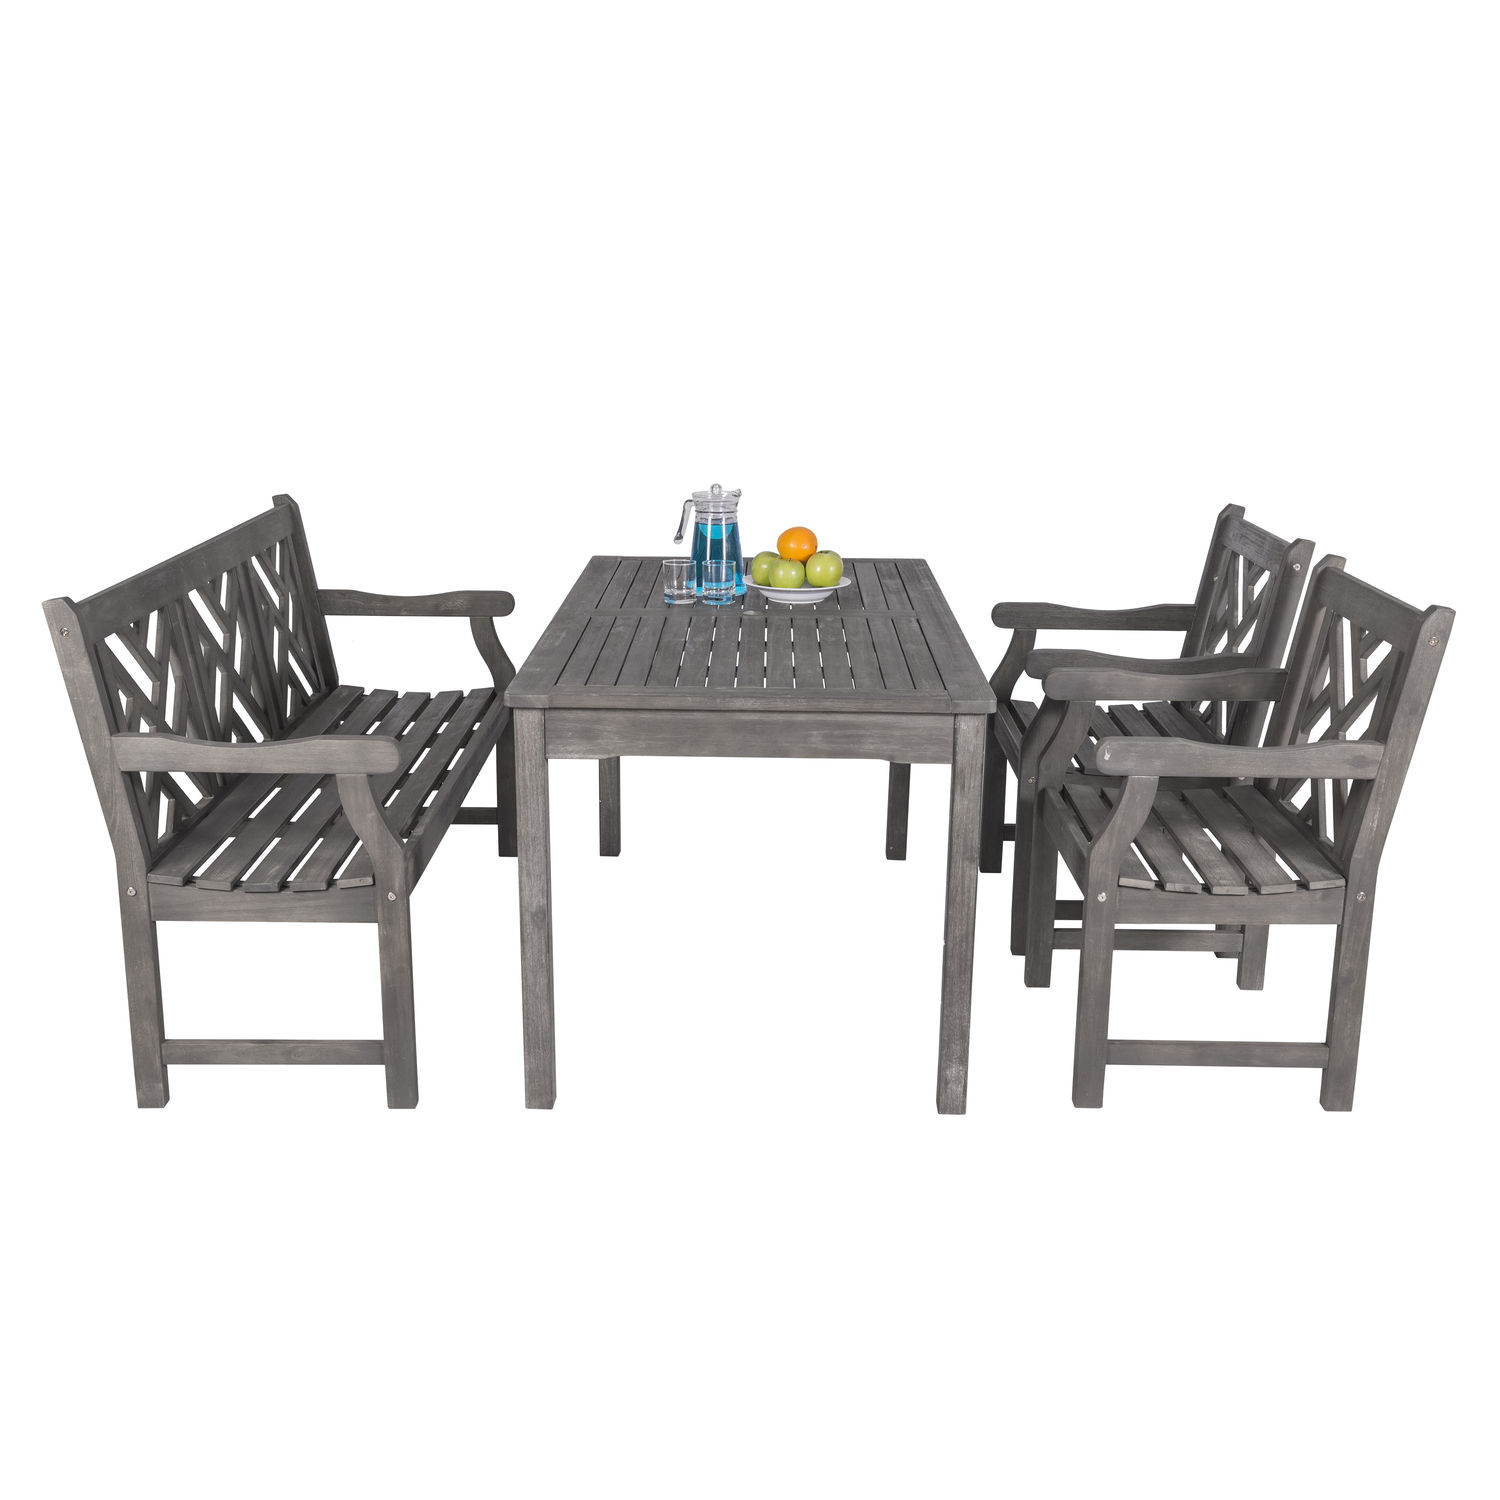 Renaissance Outdoor 4-piece Hand-scraped Wood Patio Dining Set with 4-foot Bench